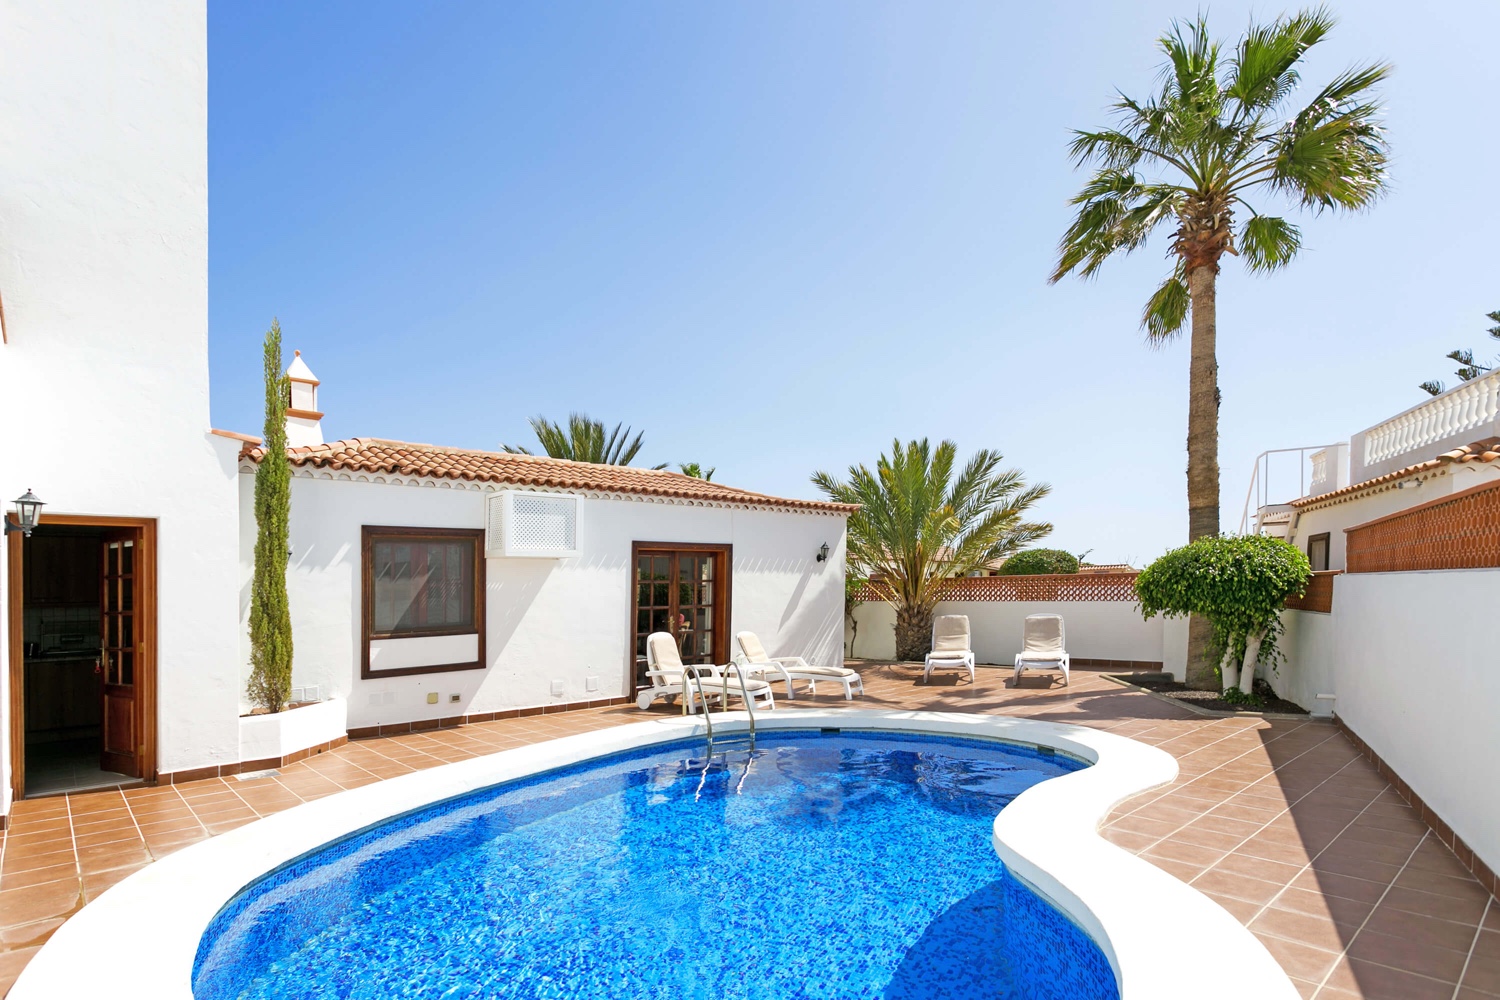 Beautiful and bright house with private pool and garden area, located on the Amarilla Golf course, a short distance from the beach and the marina